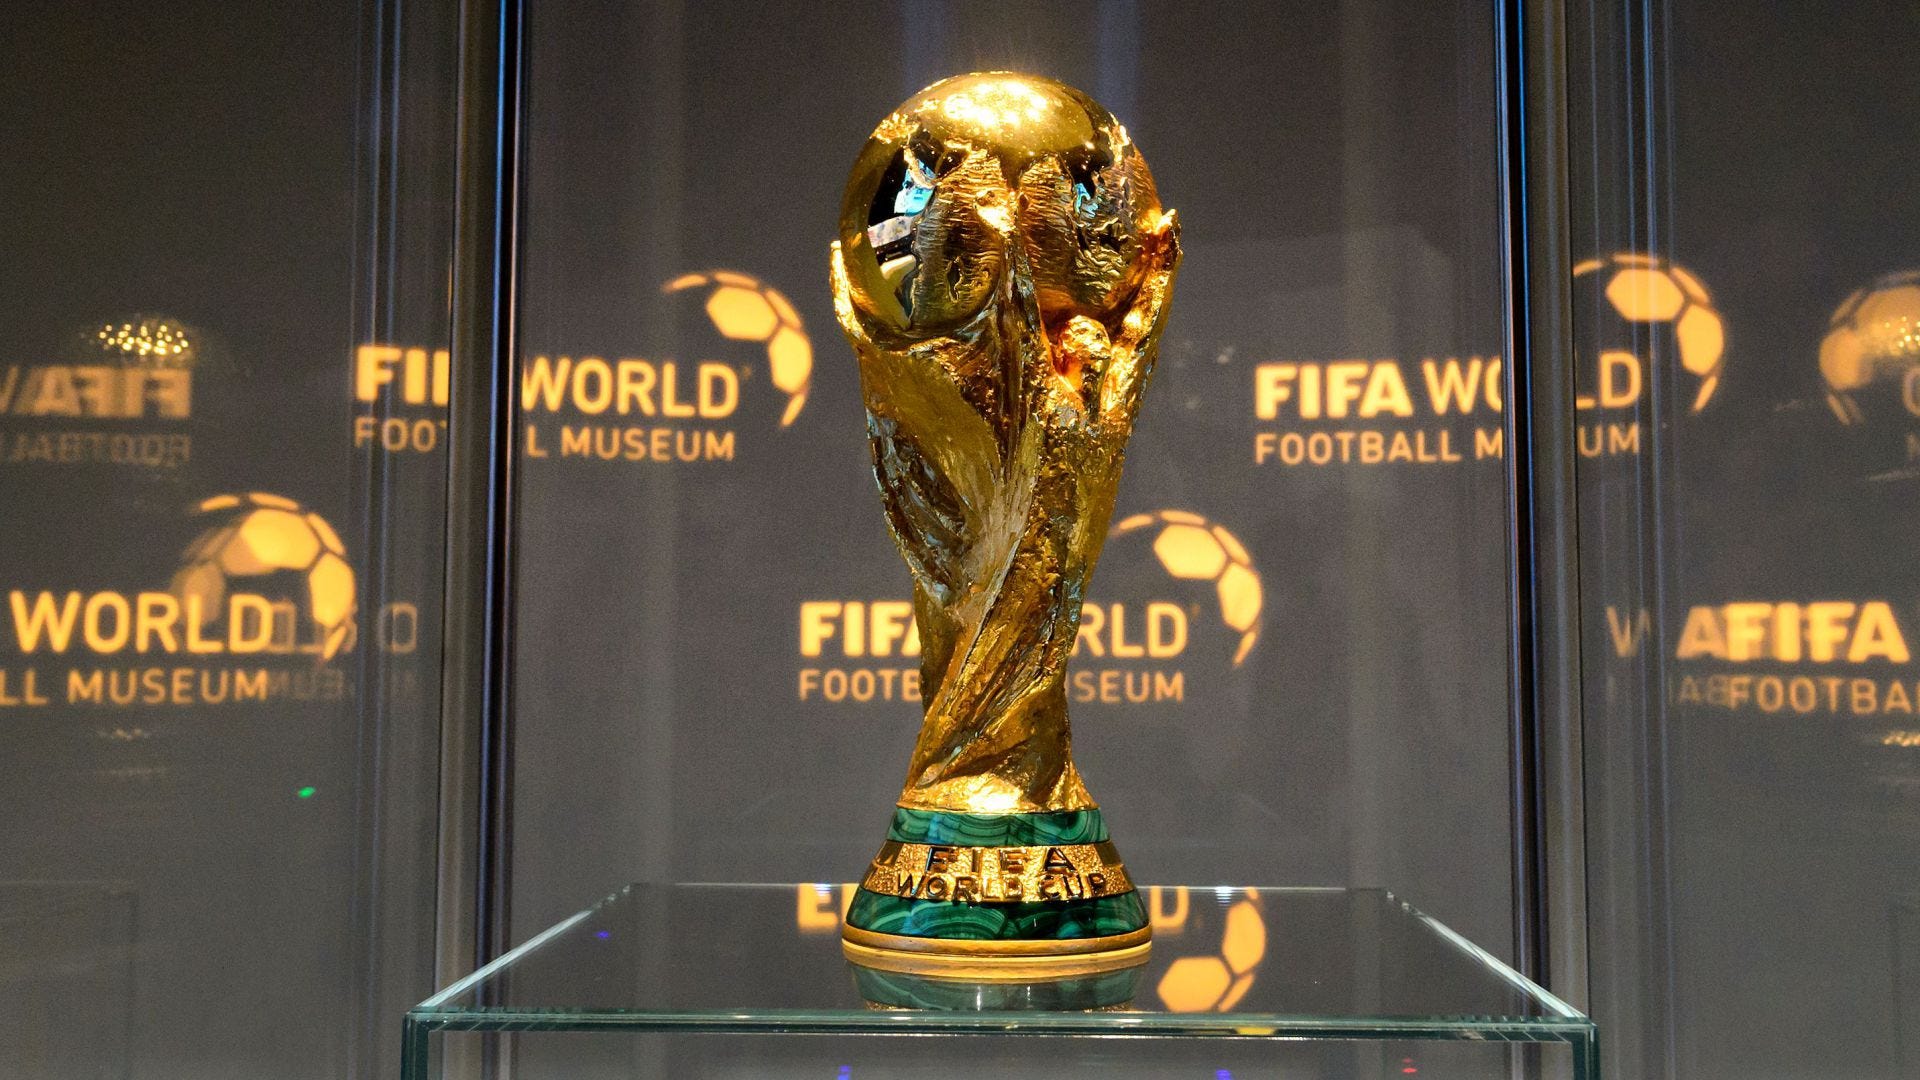 Africa reveals 2026 FIFA World Cup qualifying format